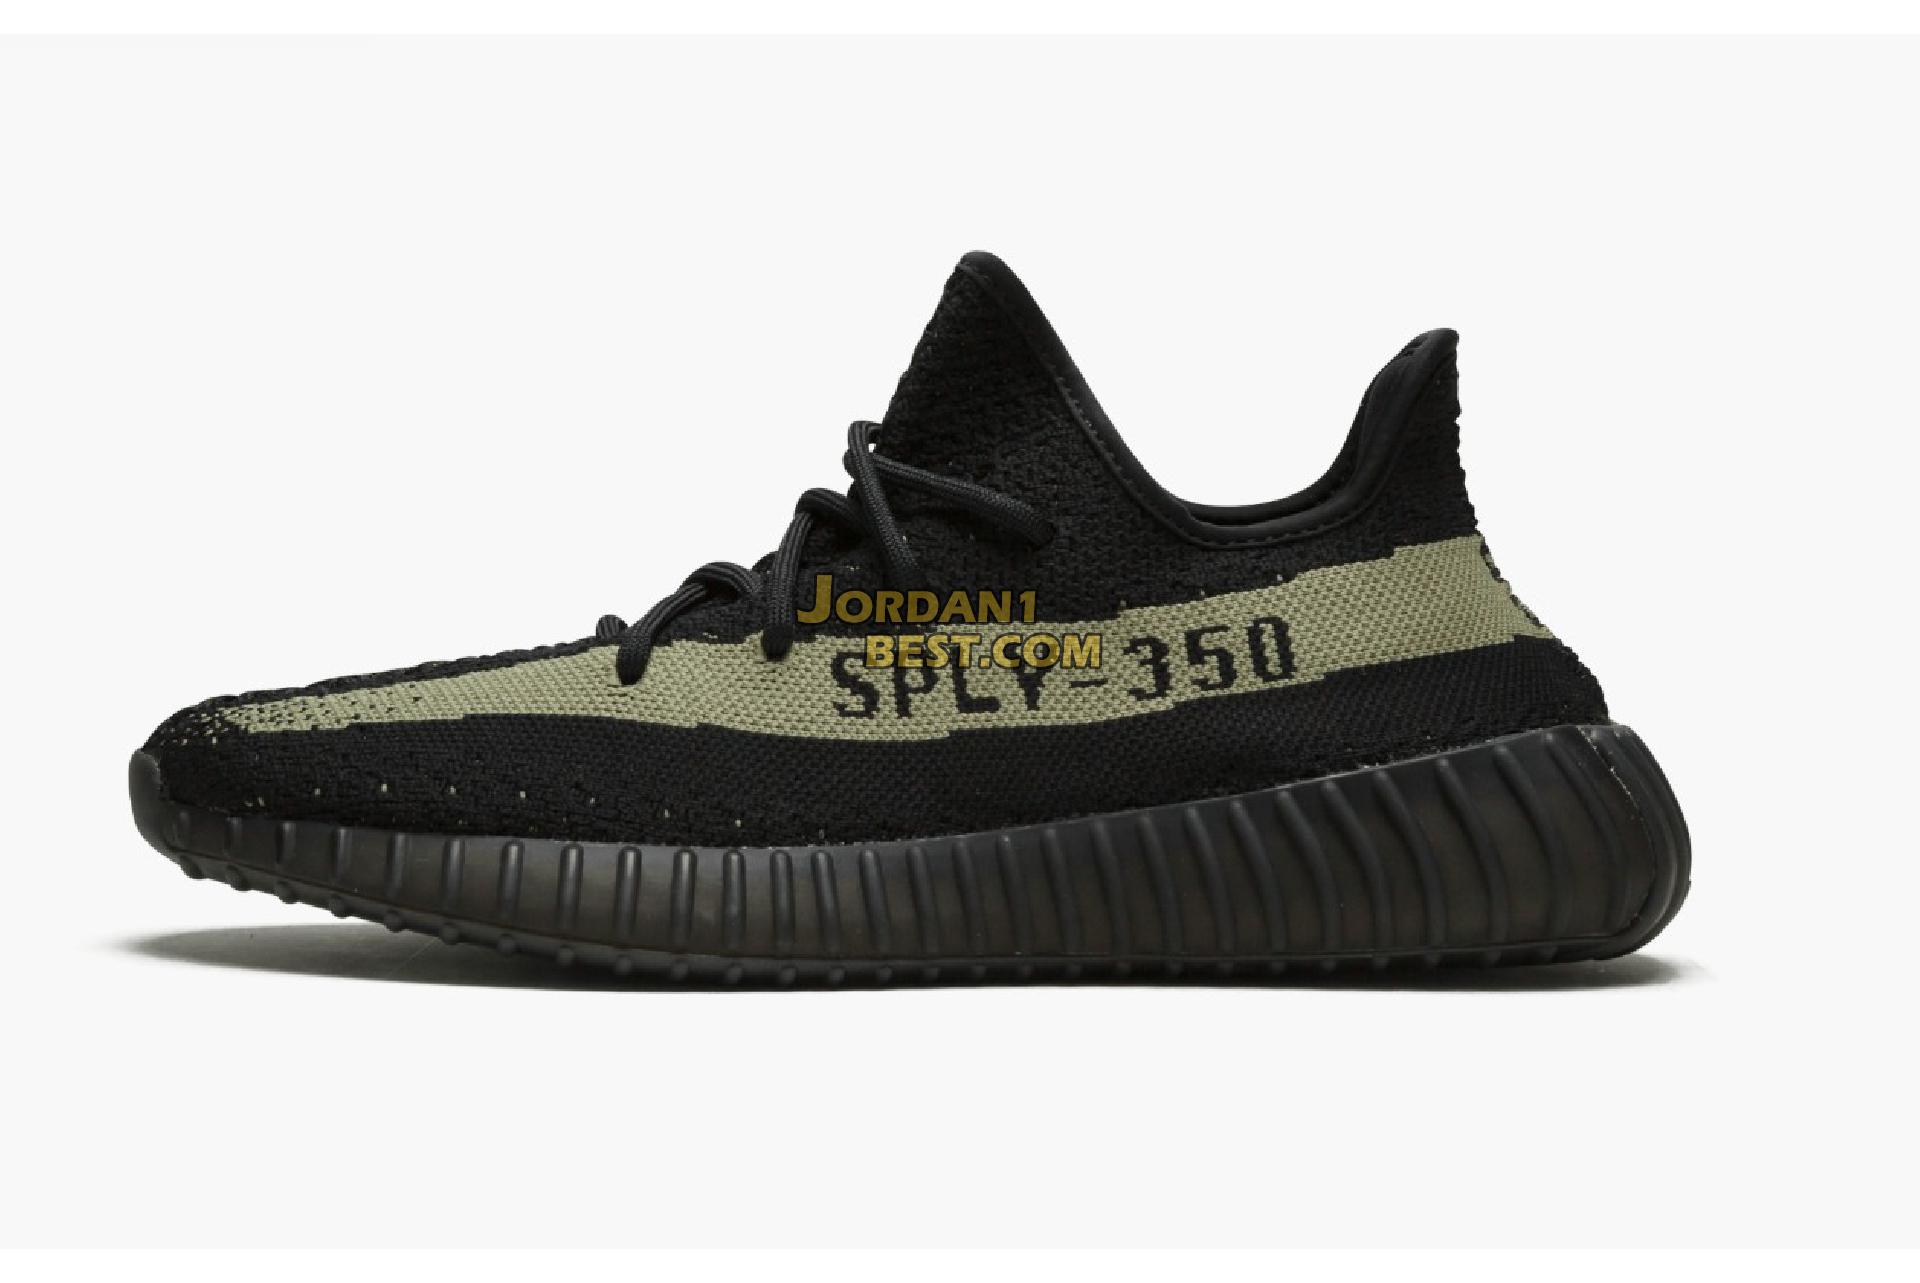 top 3 fake Adidas Yeezy Boost 350 V2 "Green" BY9611 Core Black/Green-Core Black Mens Womens Unisex Shoes replicas On Sale Wholesale